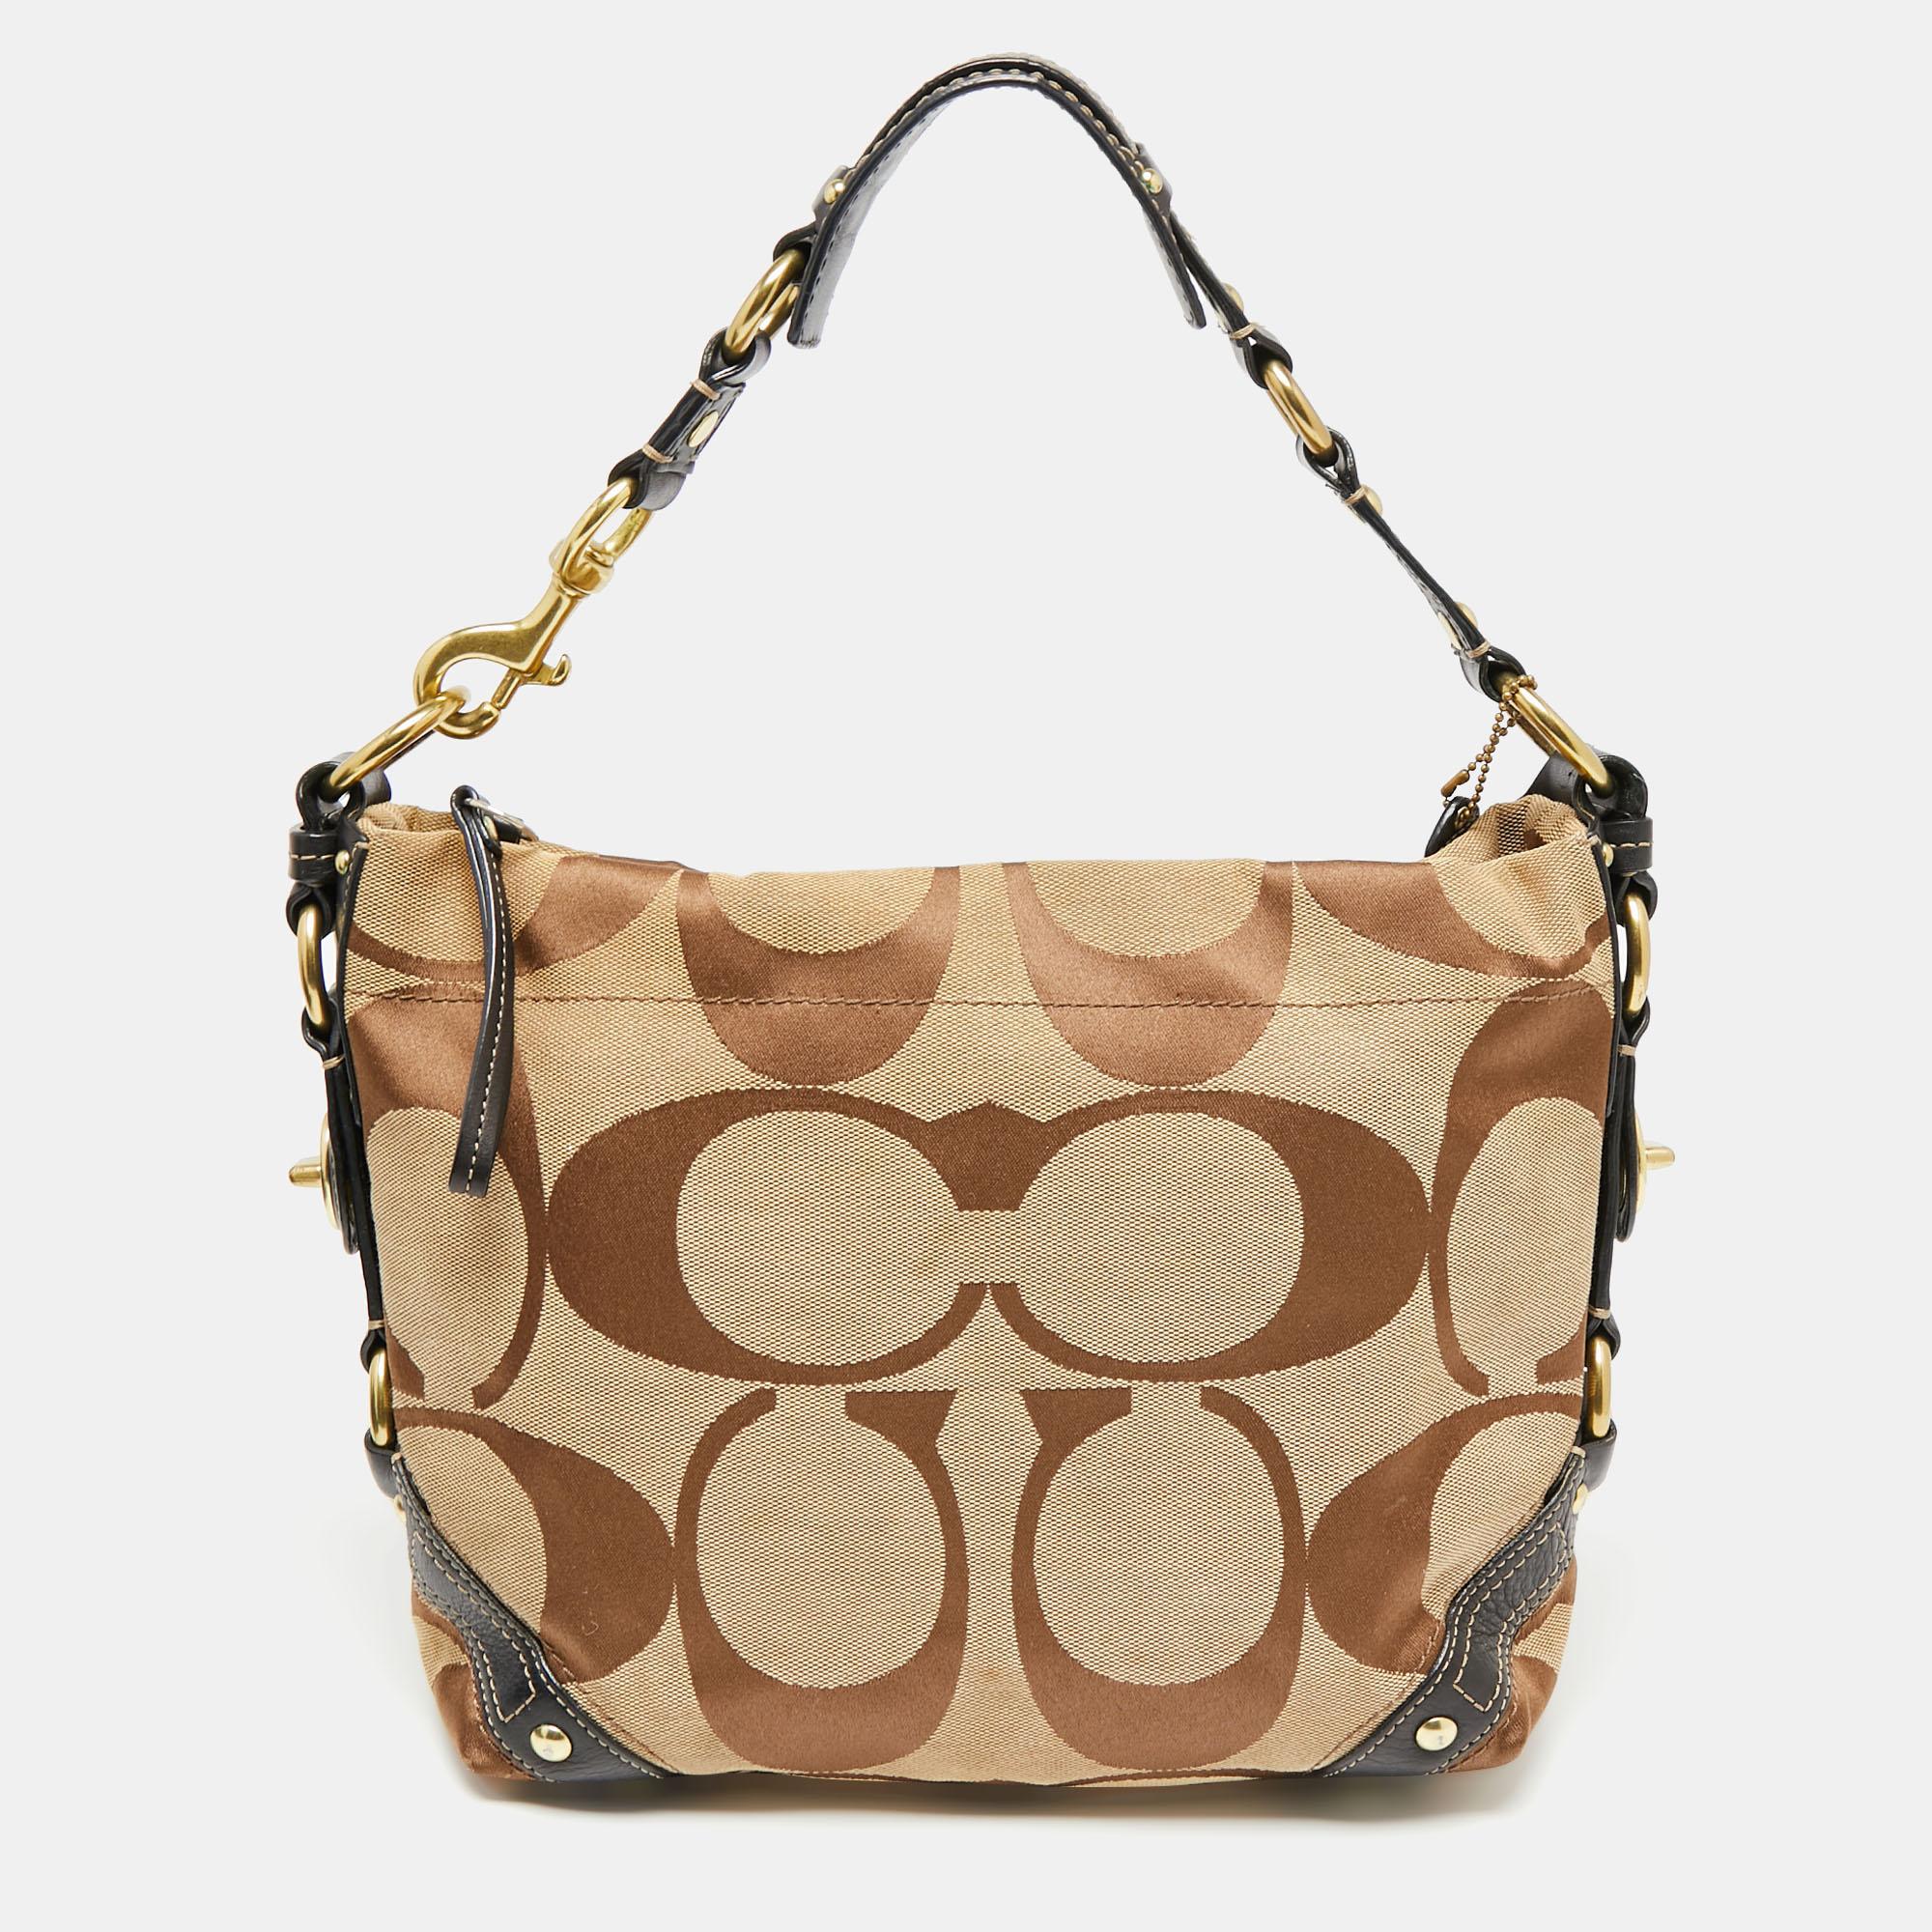 This Carly hobo from the House of Coach is made to grant you complete practicality and luxury! Made from beige and dark-brown Signature canvas and leather, this hobo is provided with a fabric-lined interior and gold-tone hardware. This stunning hobo